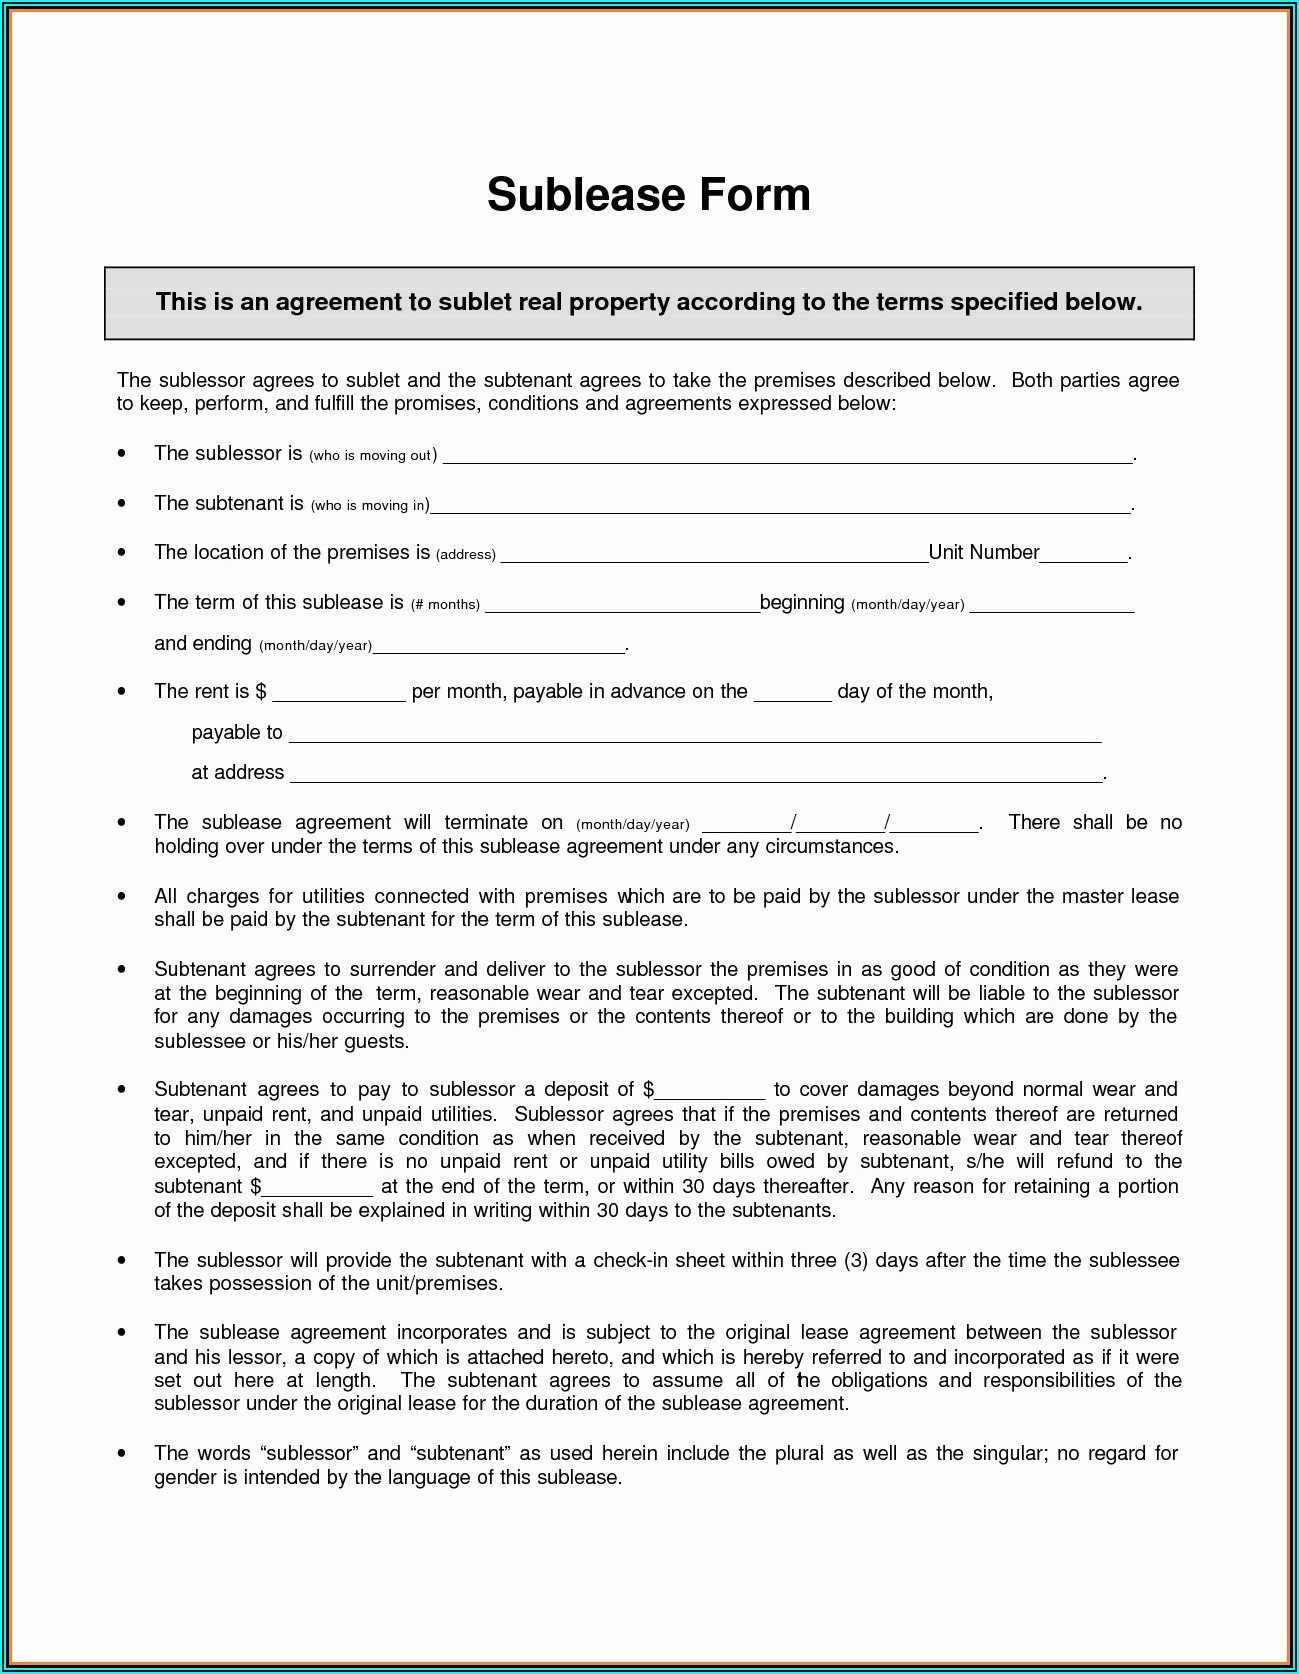 Sublease Agreement Format In Word India